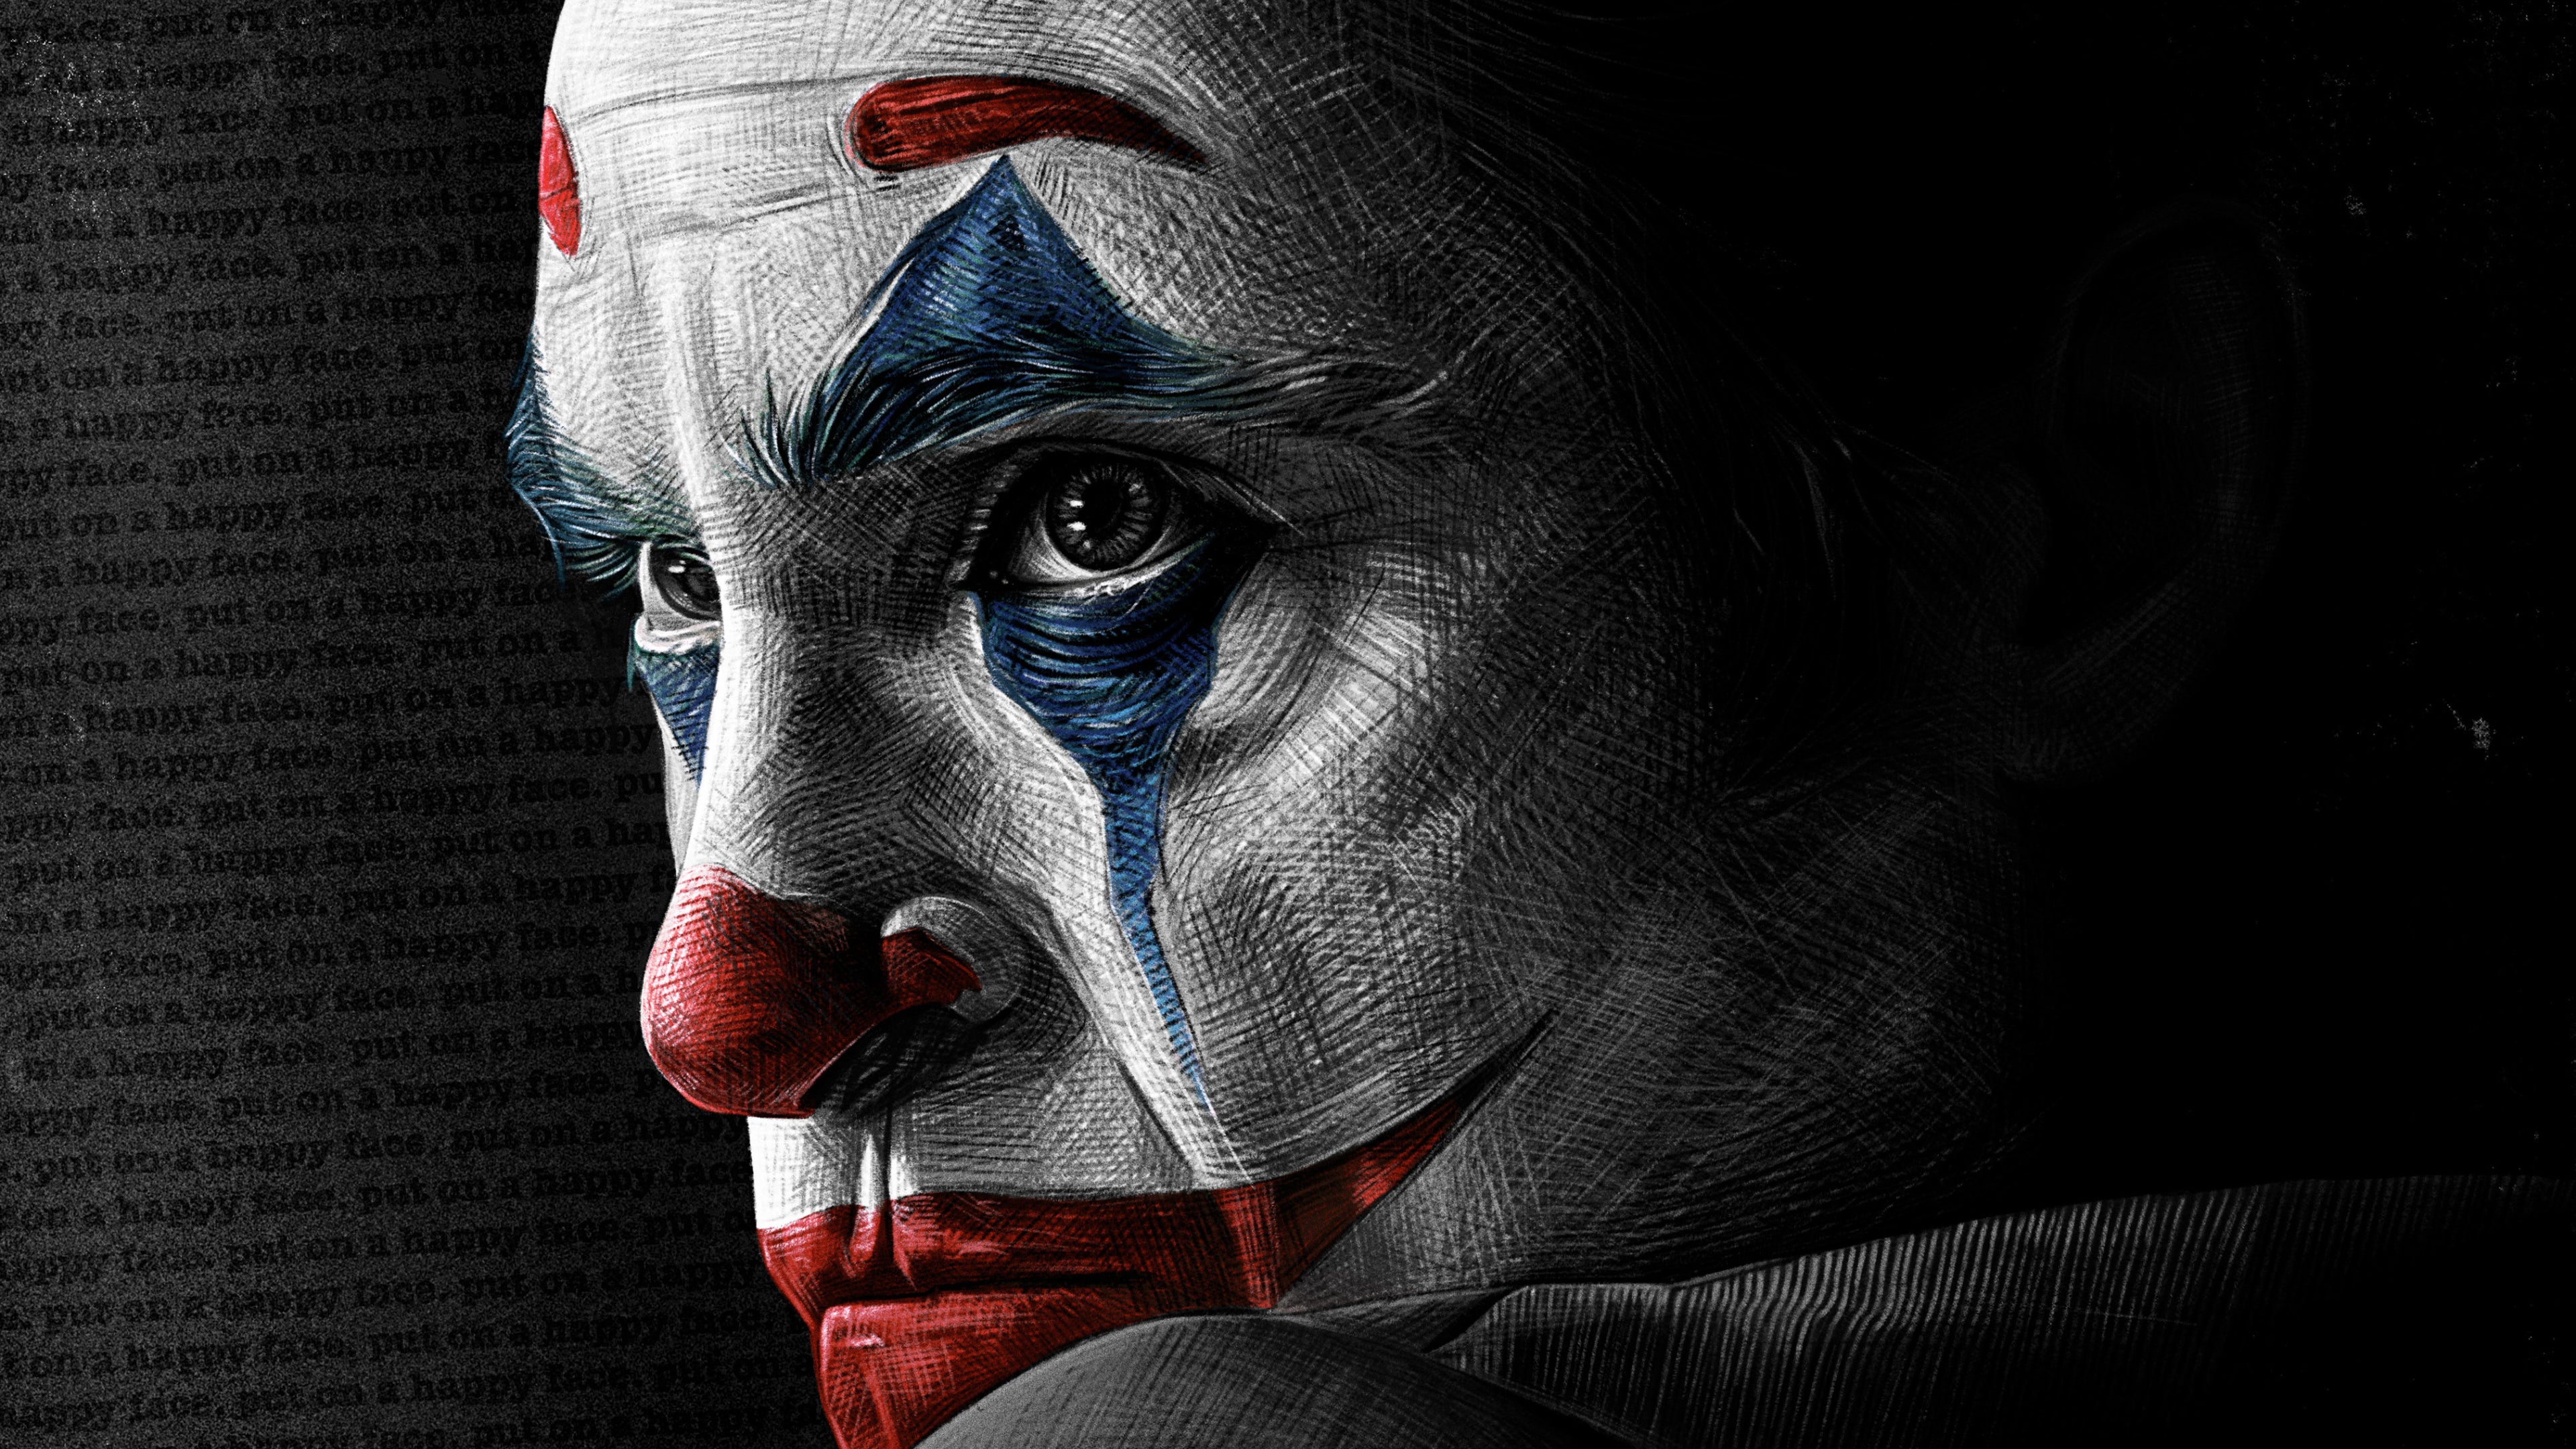 Joker 4k Wallpapers For Your Desktop Or Mobile Screen Free And